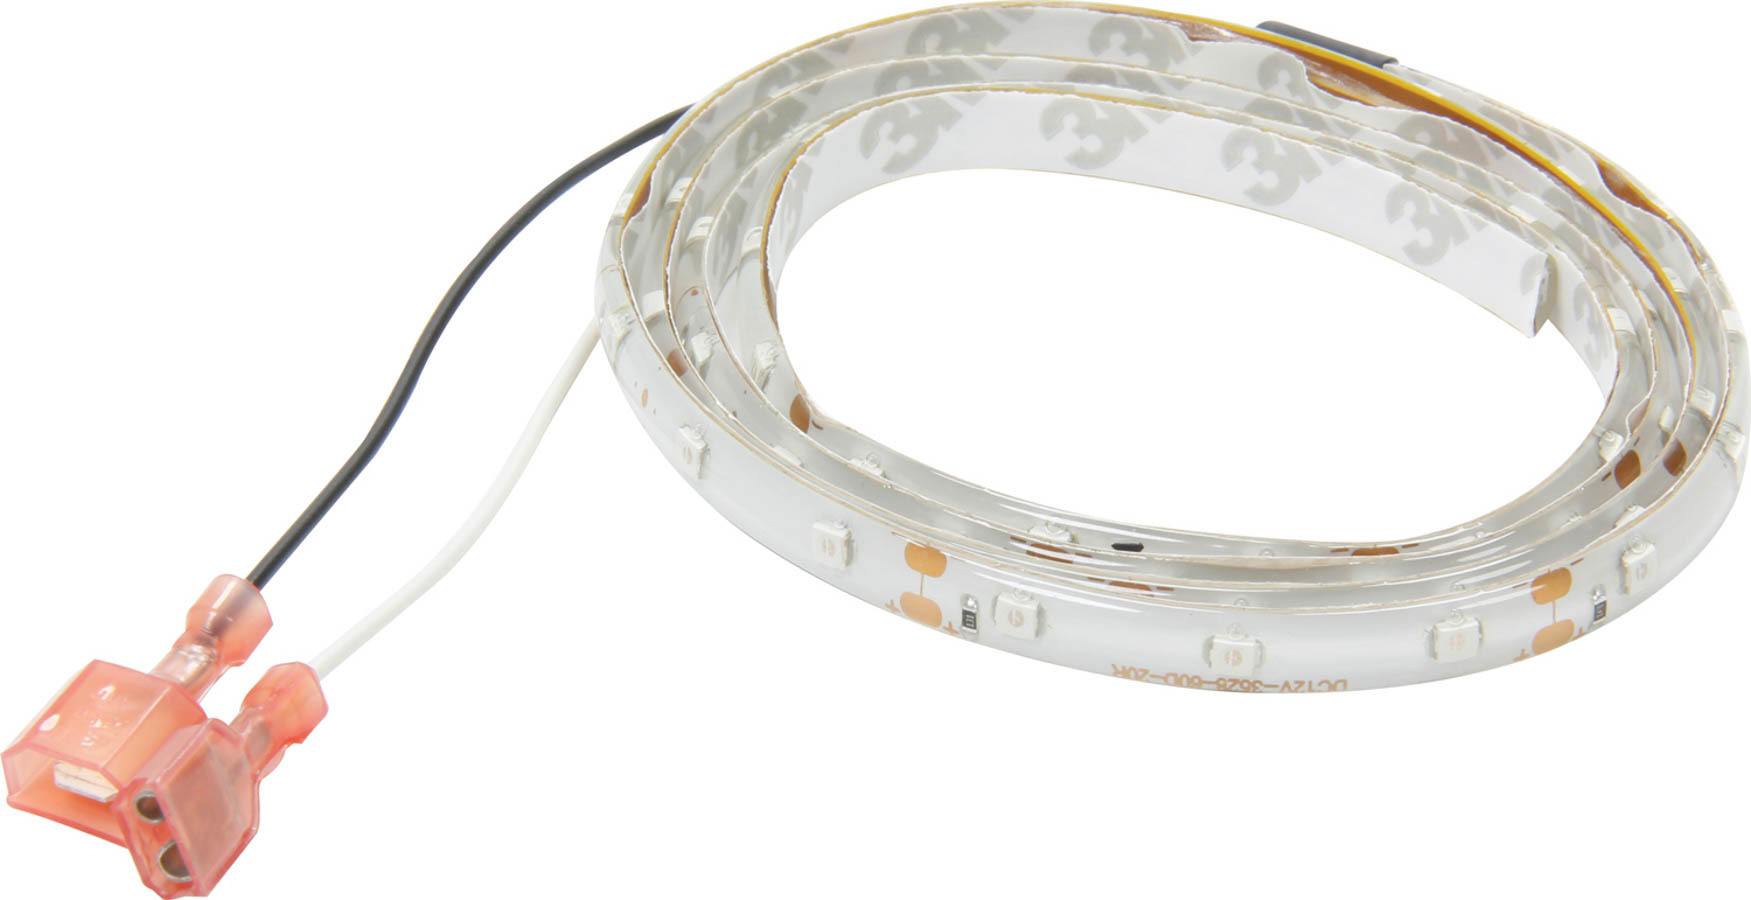 QuickCar 61-791 - Light Strip, LED, 18 in Long, Connectors, Yellow, Universal, Each